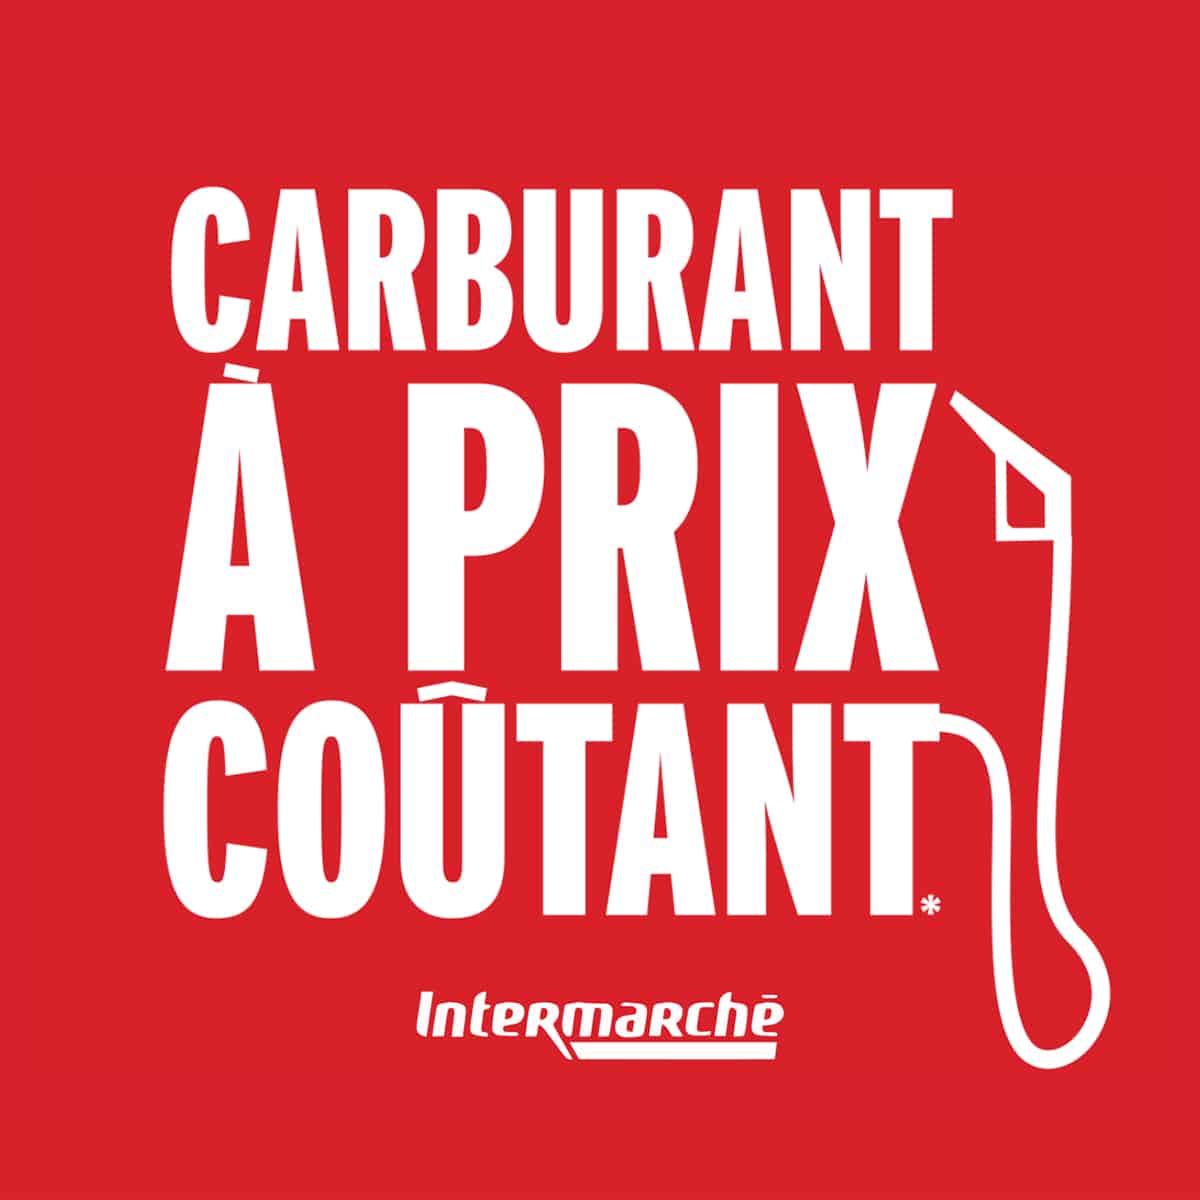 Intermarch 233 Carburant 224 prix co 251 tant ce week end